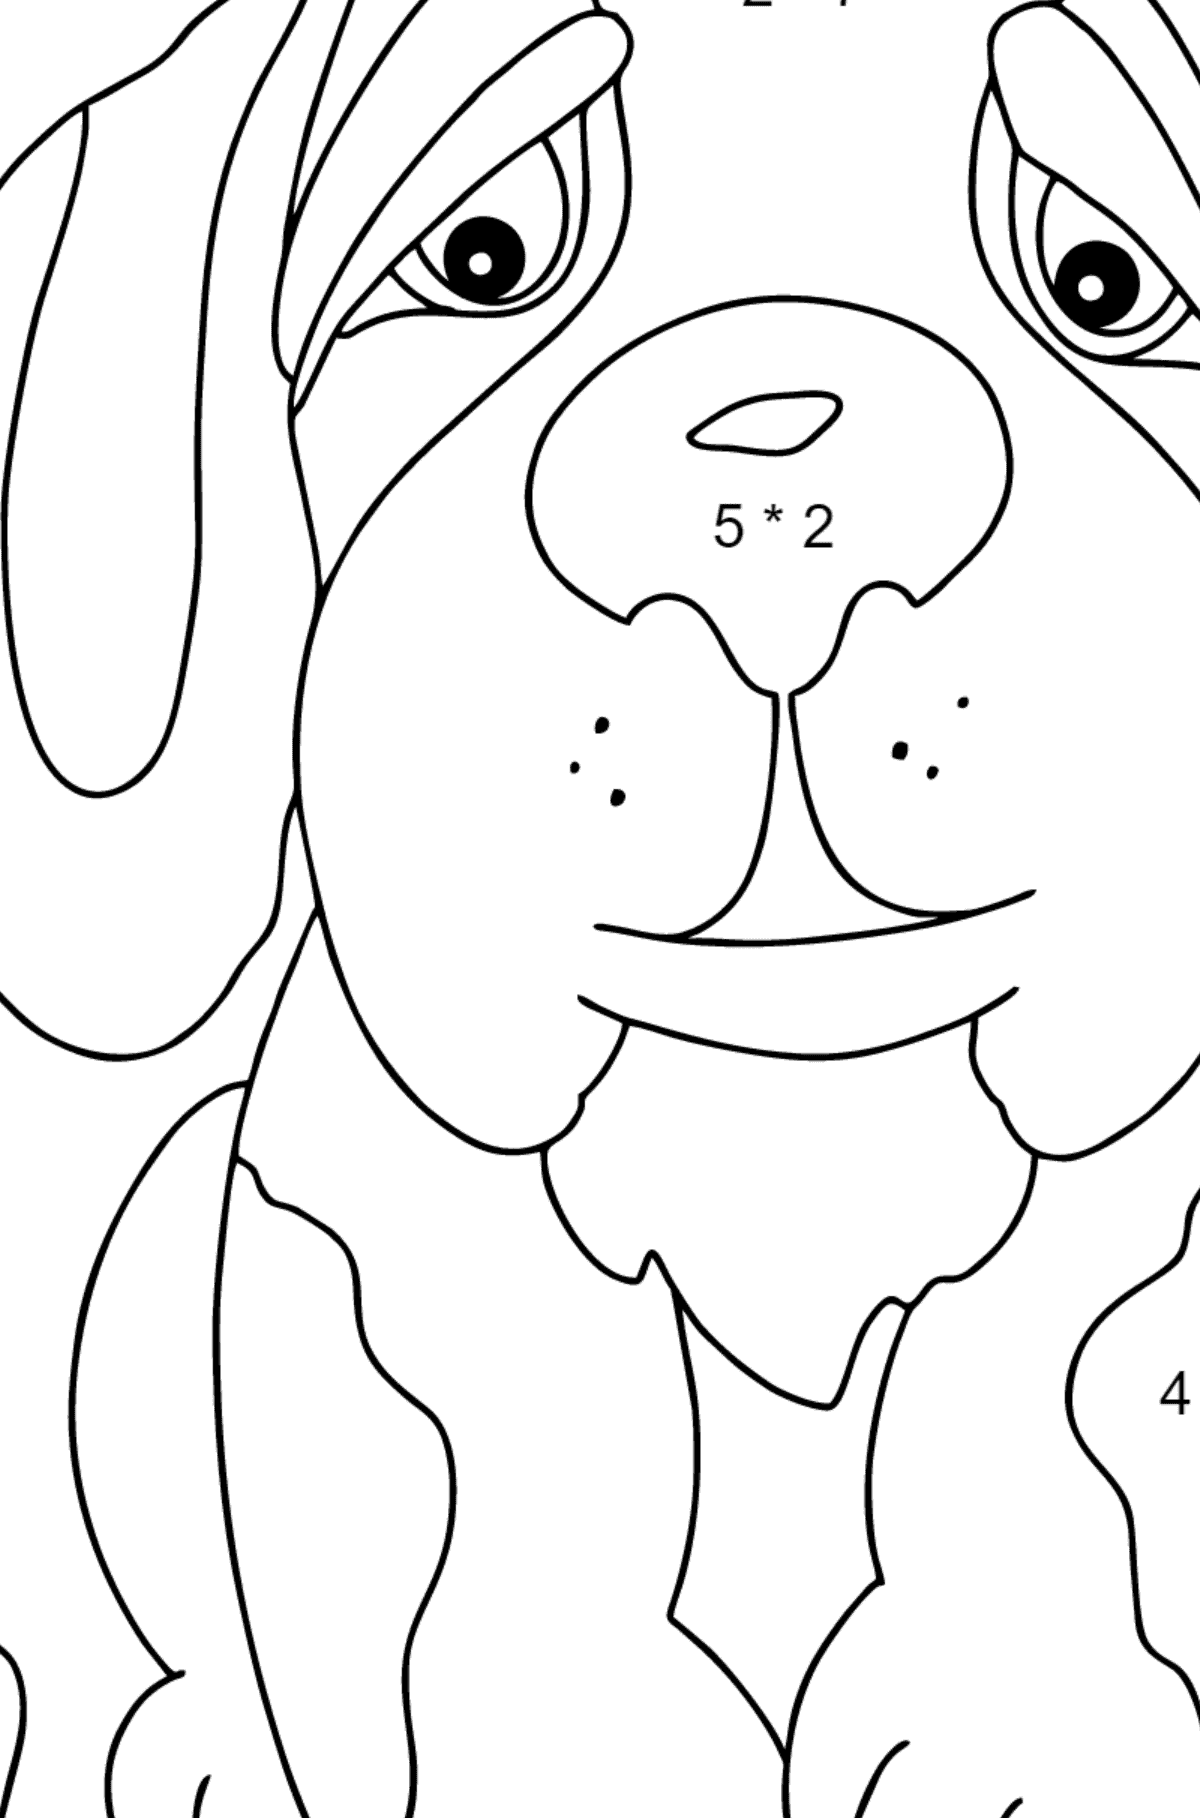 Coloring Page - A Dog is Looking Out a Butterfly for Children  - Color by Number Multiplication